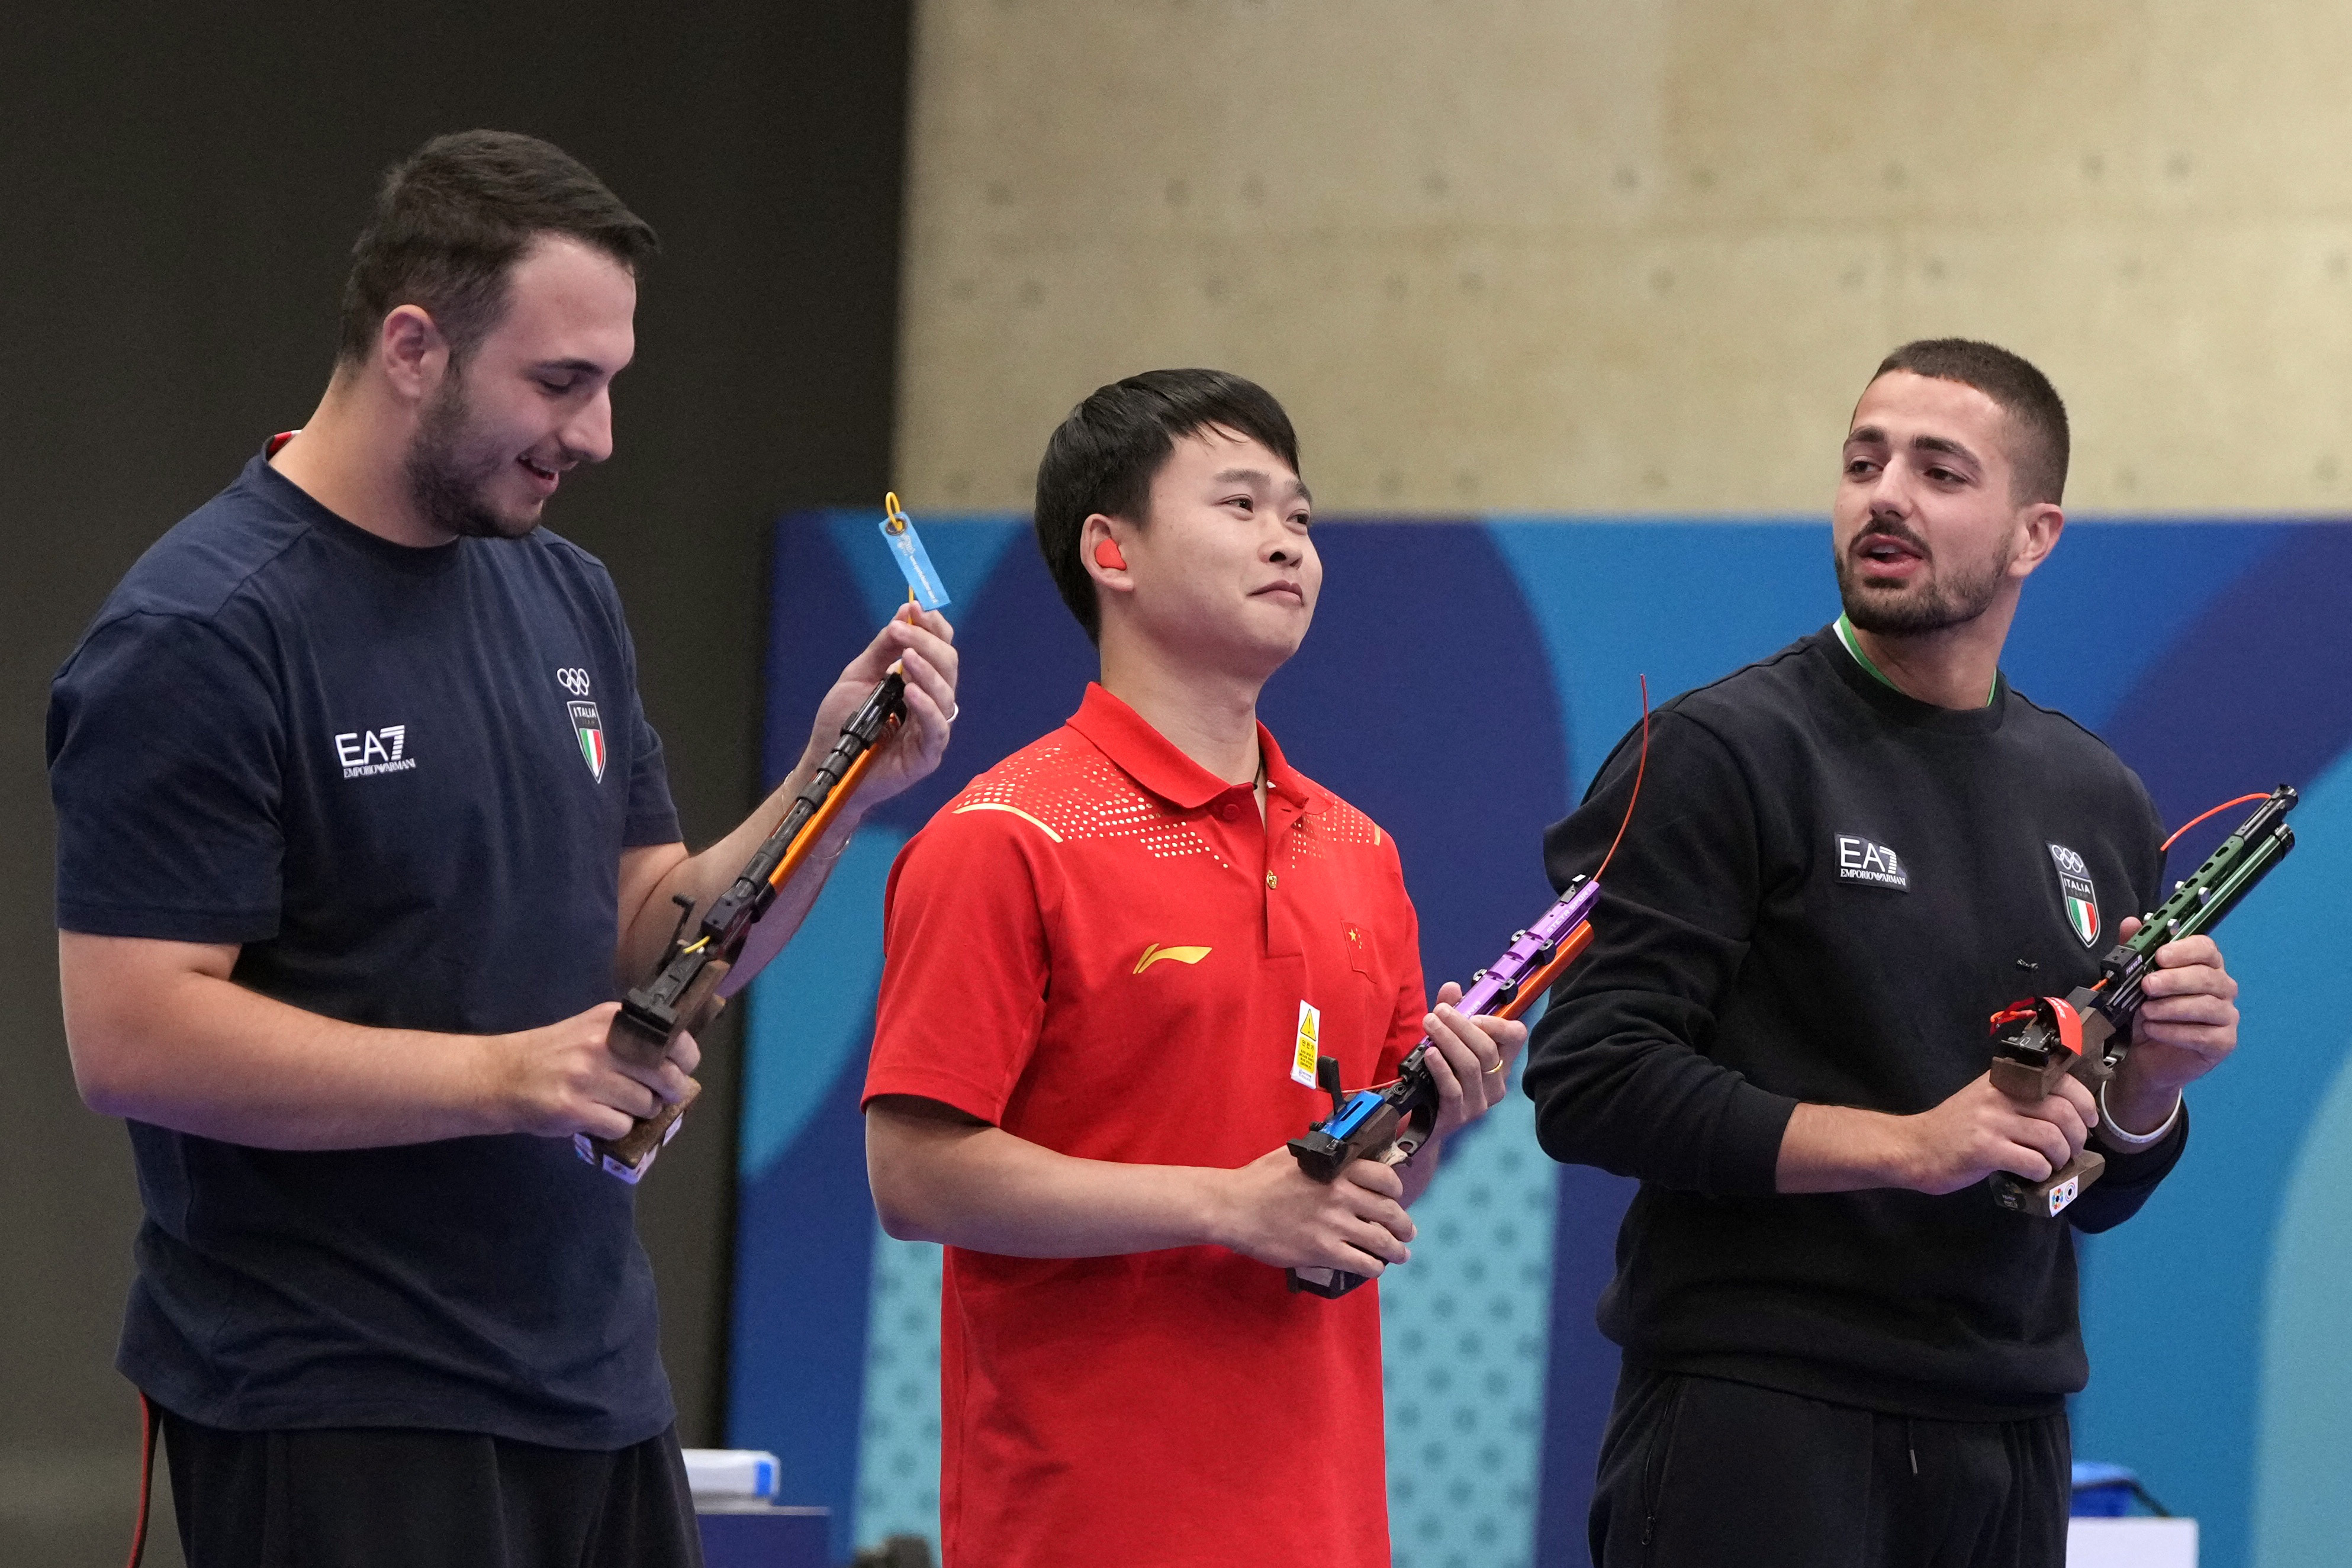 PARIS 2024 OLYMPICS  - Shooting - 10m Air Pistol Men's Final - Chateauroux Shooting Centre, Dols, France - July 28, 2024. (L-R) Federico Nilo Maldini of Italy  , Yu Xie (C) of China, and Paolo Monna of Italy pose with their pistols after finishing second, first and third. REUTERS/Amr Alfiky